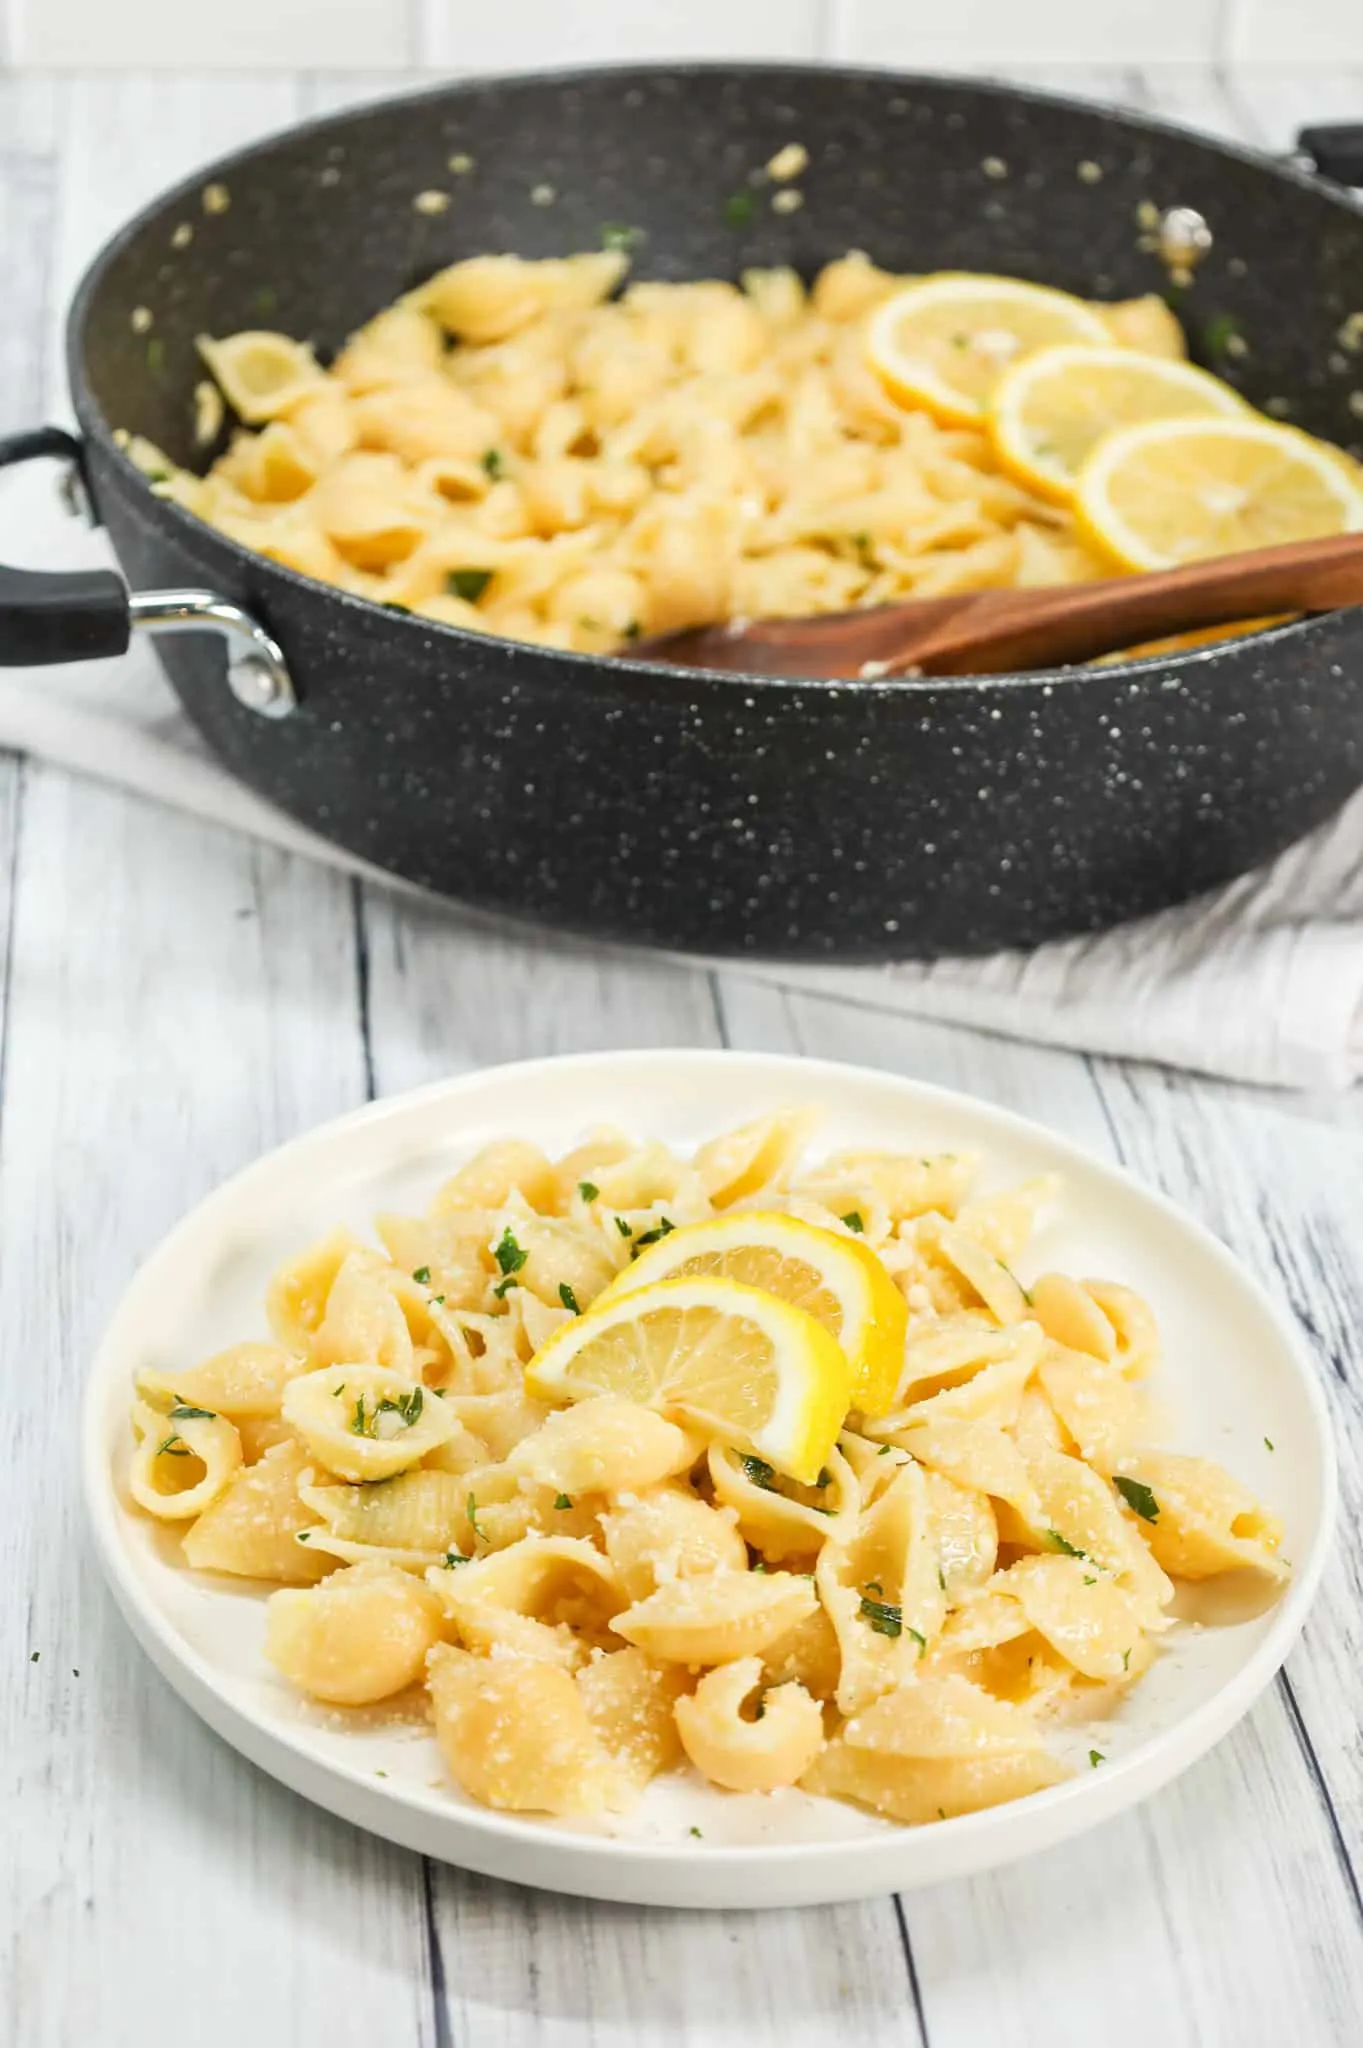 Lemon Garlic Pasta is a simple dinner recipe using shell pasta tossed in a lemon garlic butter sauce and topped with grated parmesan and chopped parsley.